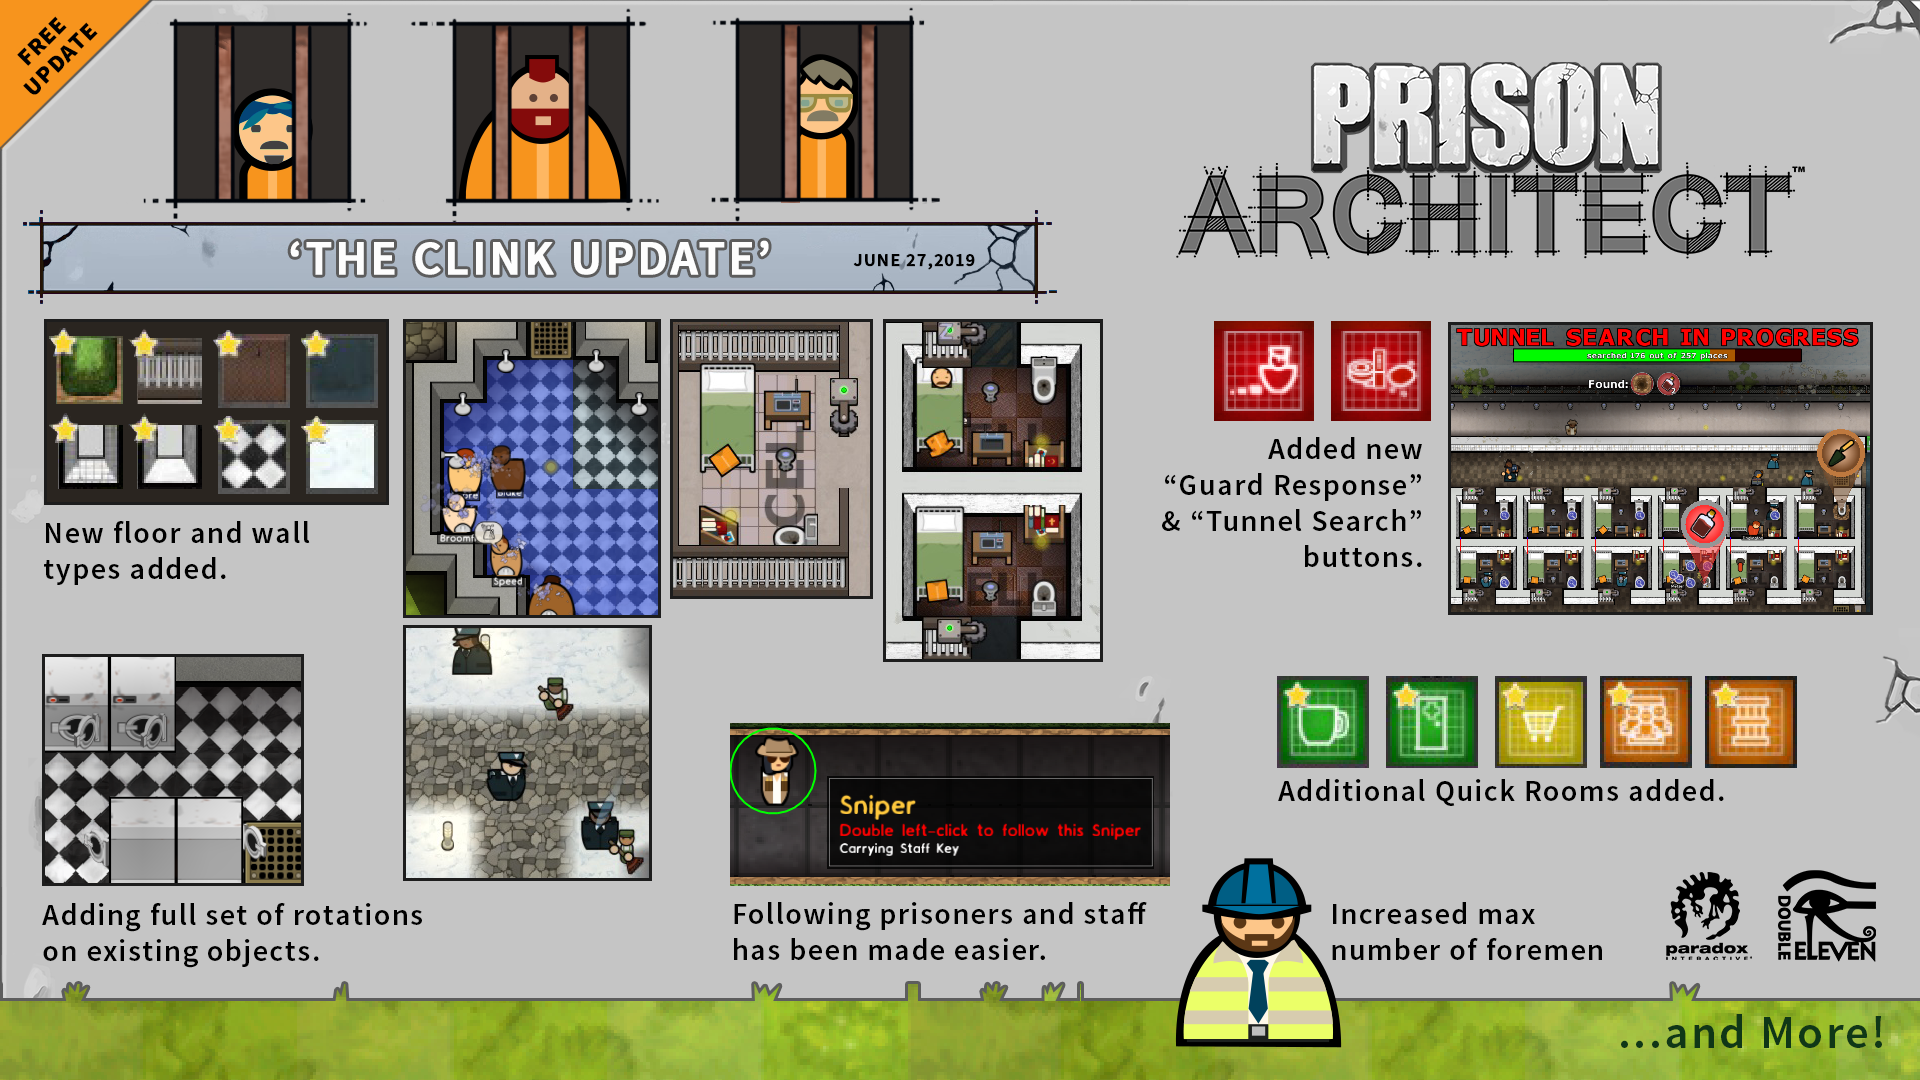 Inmates - First look at 'Inmates' - Livestream at 5 PM CEST / 8 AM PDT -  Steam News